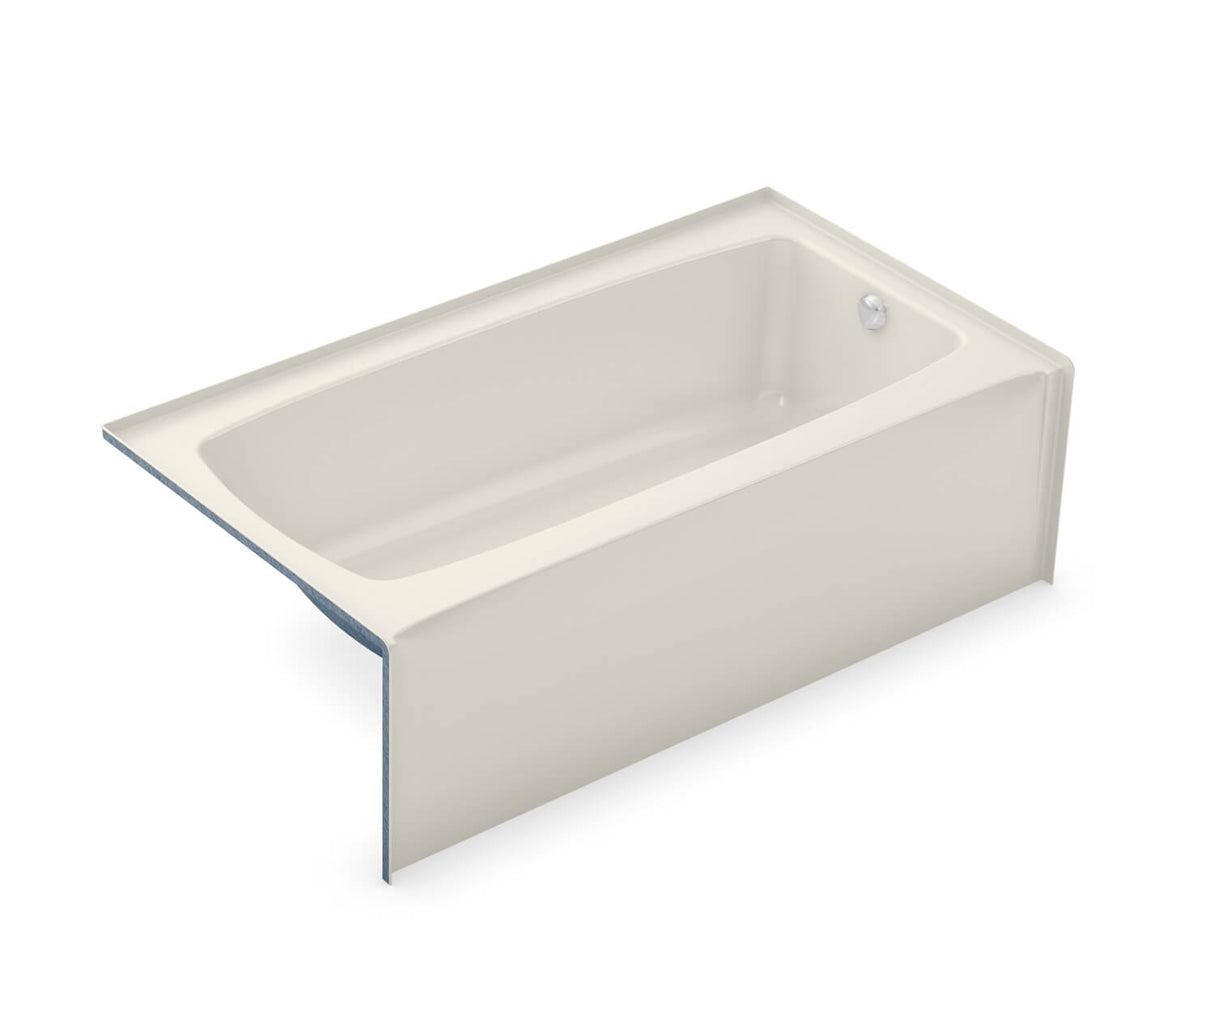 Aker TO-3260 AFR AcrylX Alcove Left-Hand Drain Bath in Biscuit